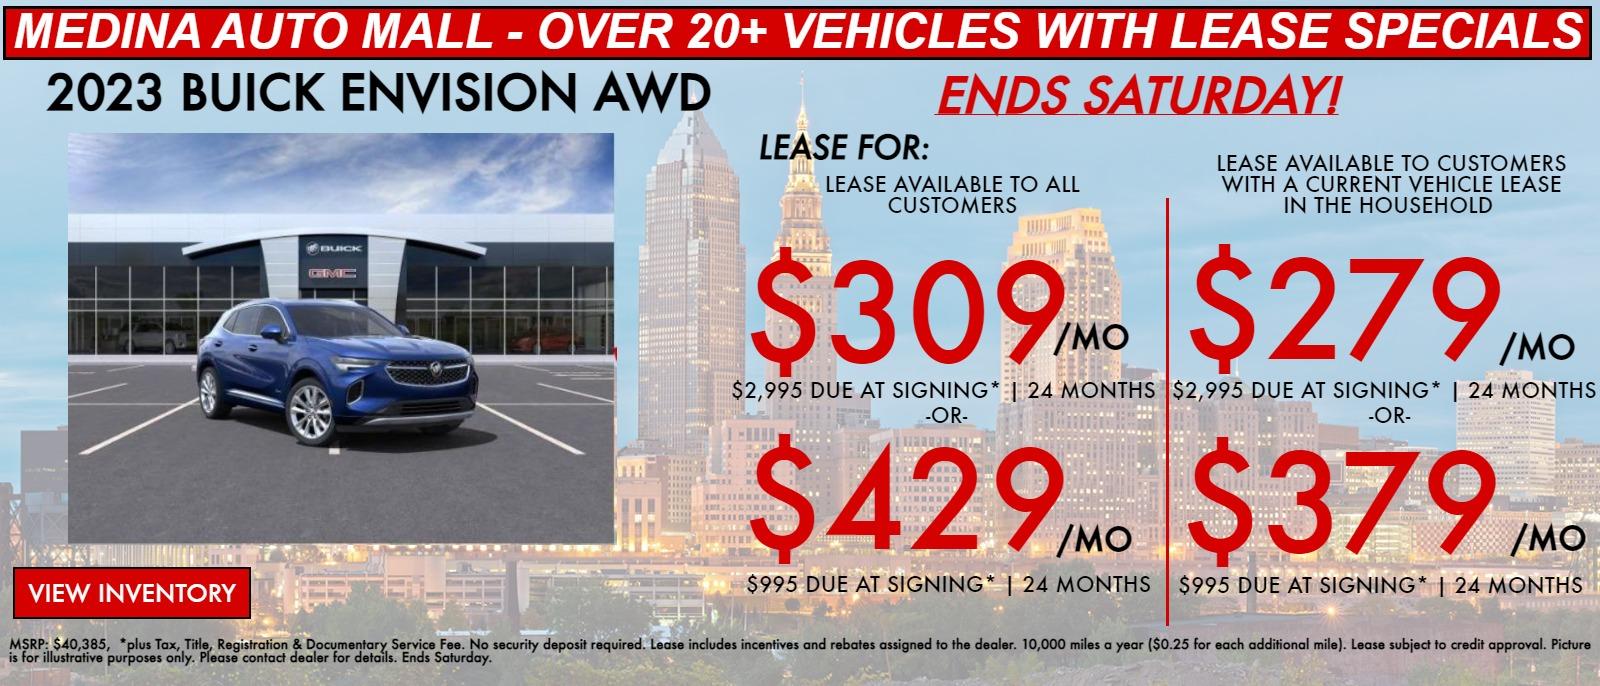 Envision lease special deals in Medina, OH